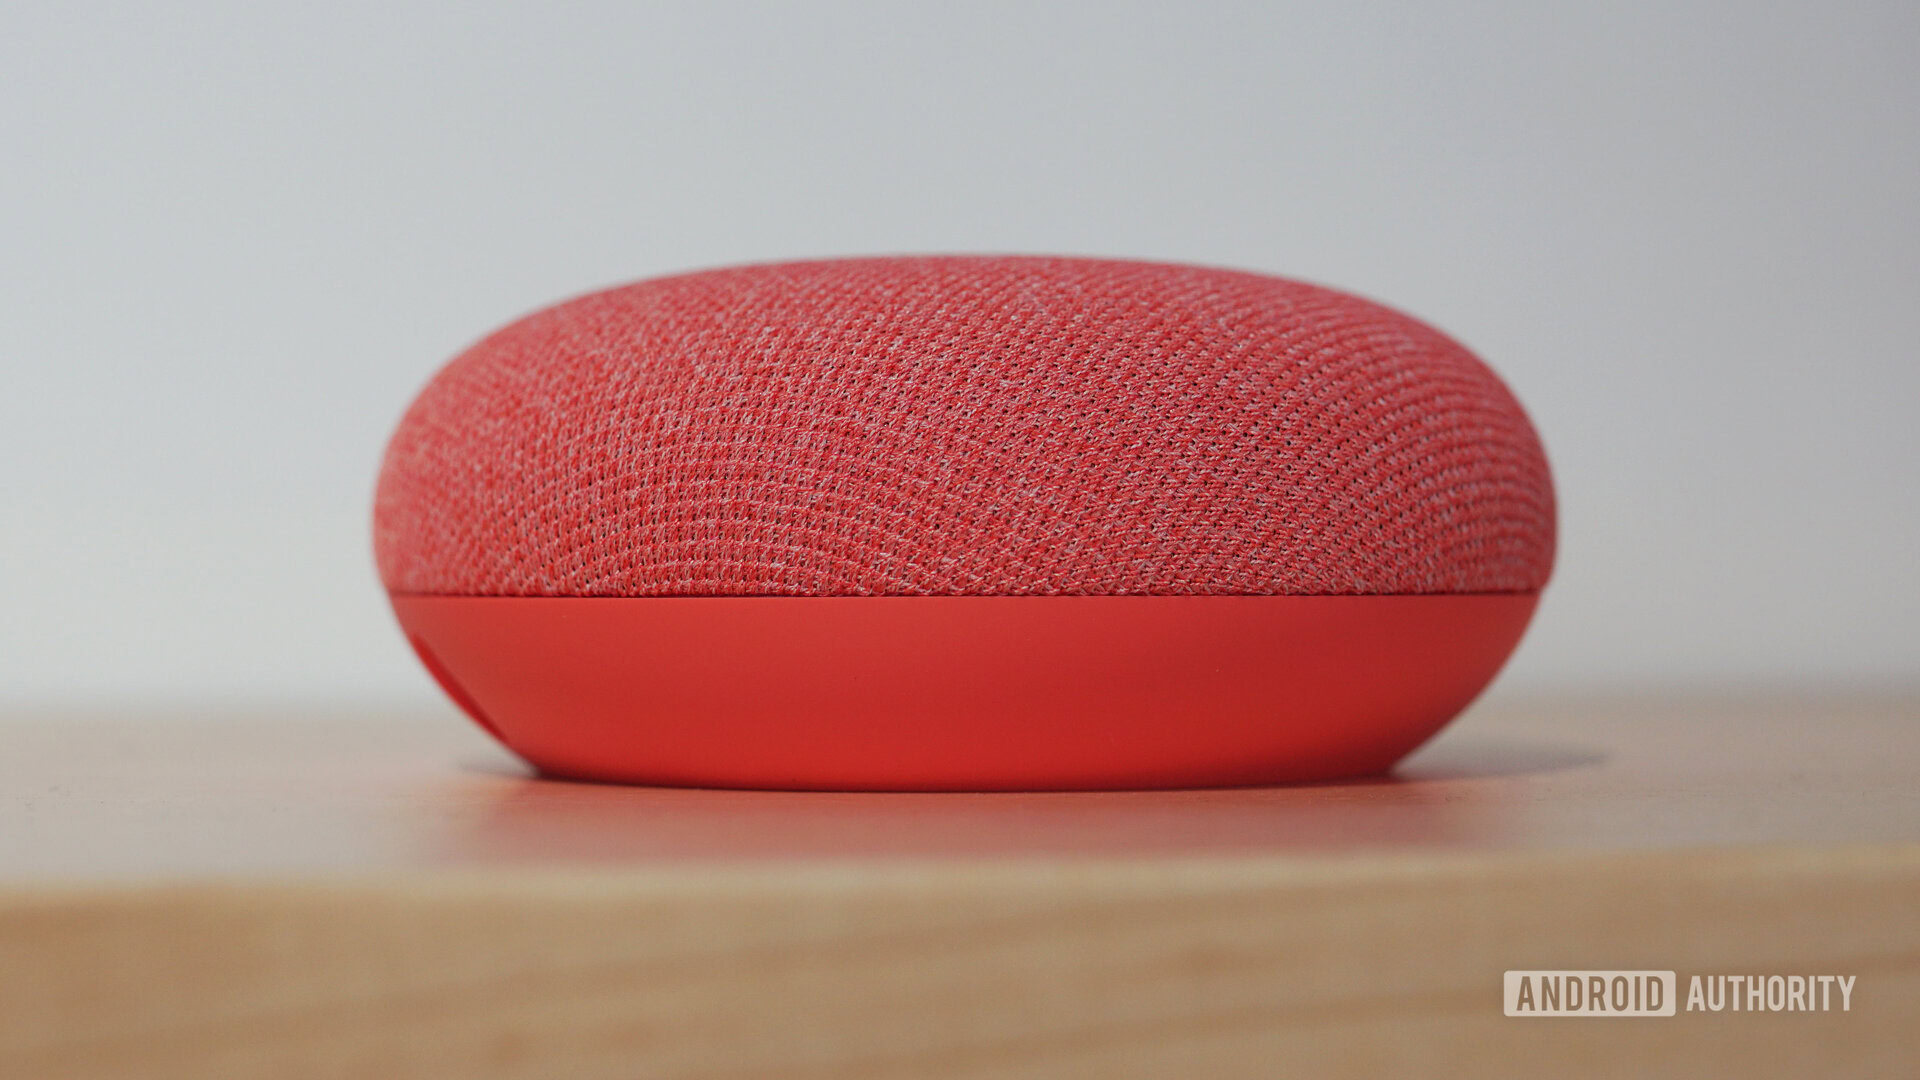 Google Home review: the smart speaker that answers almost any question, Google